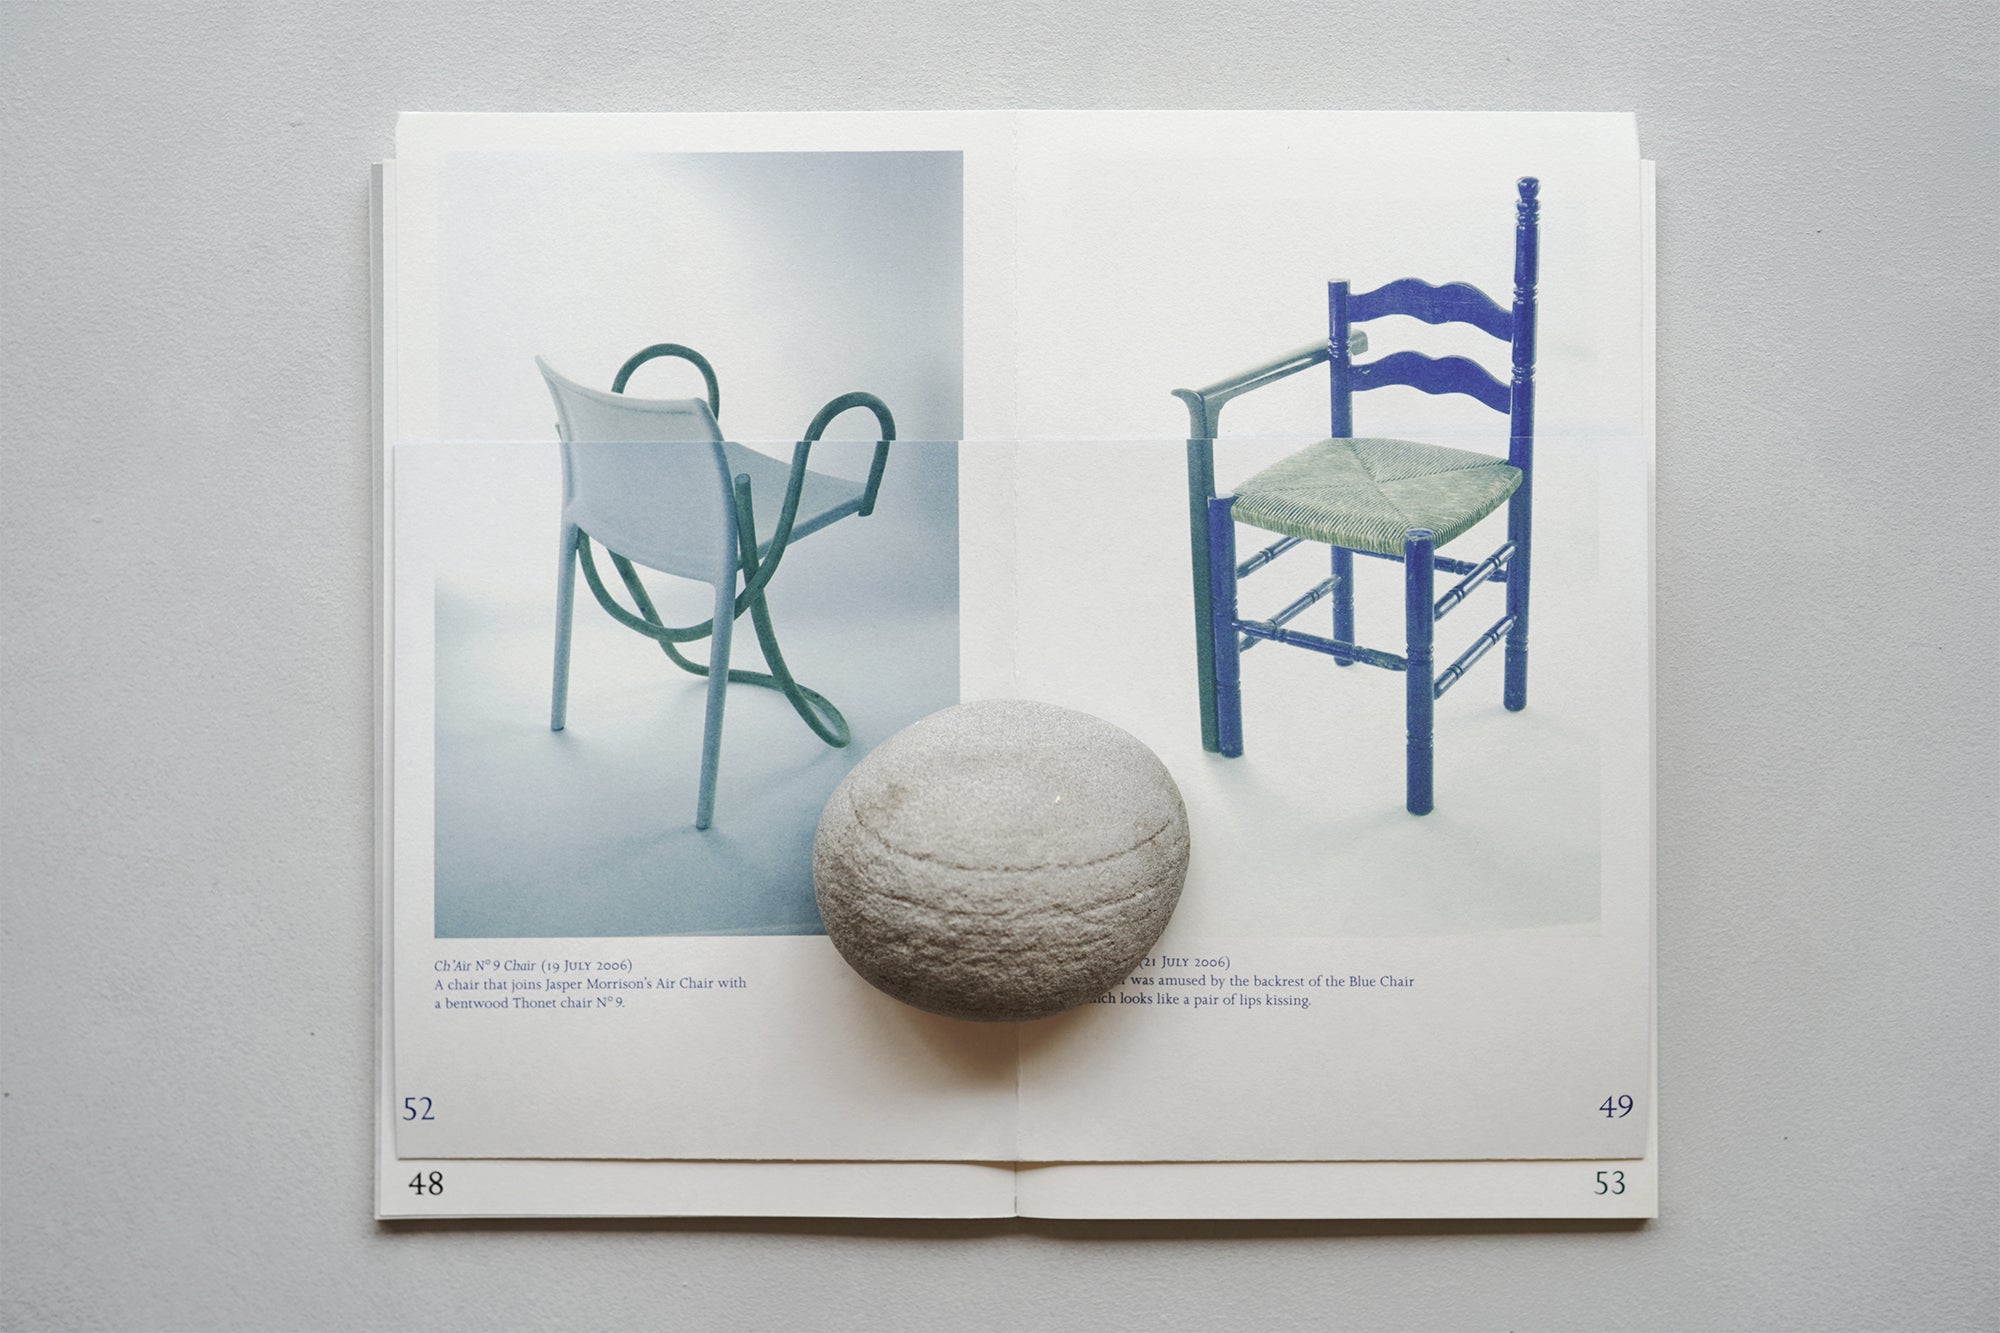 100Chairs in 100 Days and its 100 Ways (4th Edition) / Martino Gamper